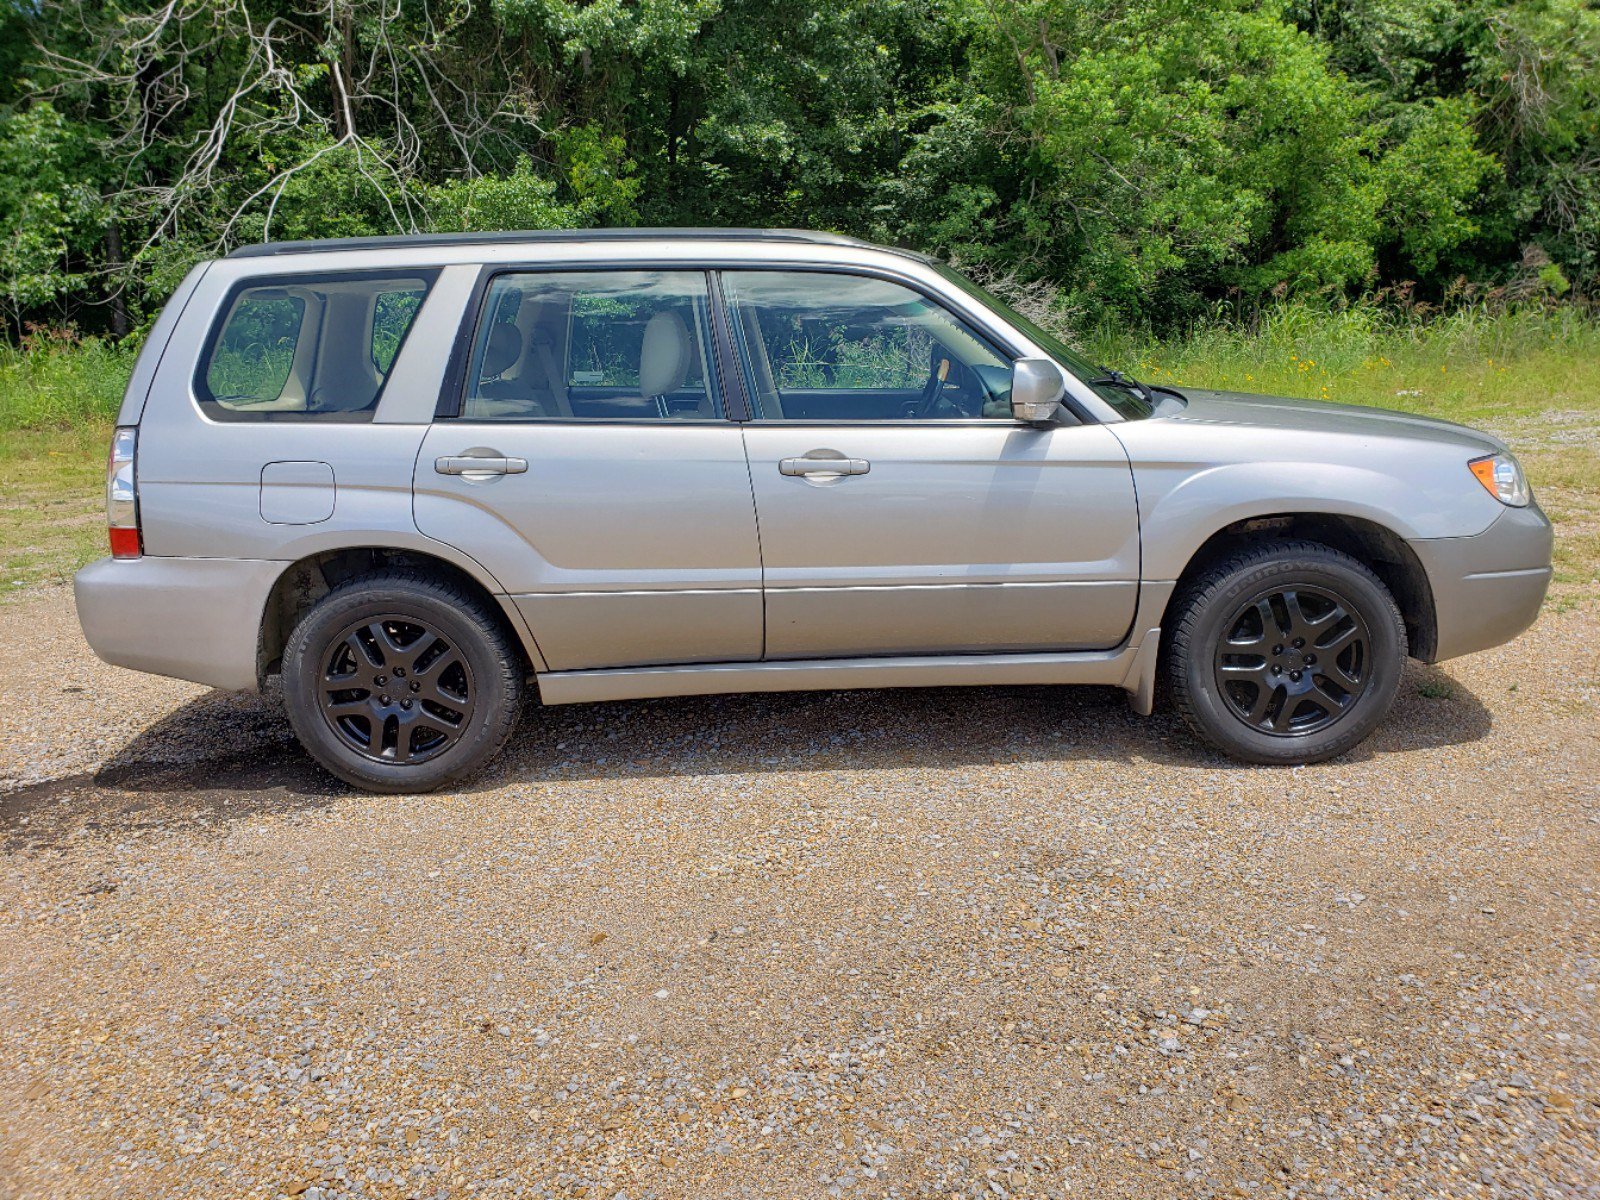 PreOwned 2006 Subaru Forester 2.5 X L.L. Bean Edition AWD